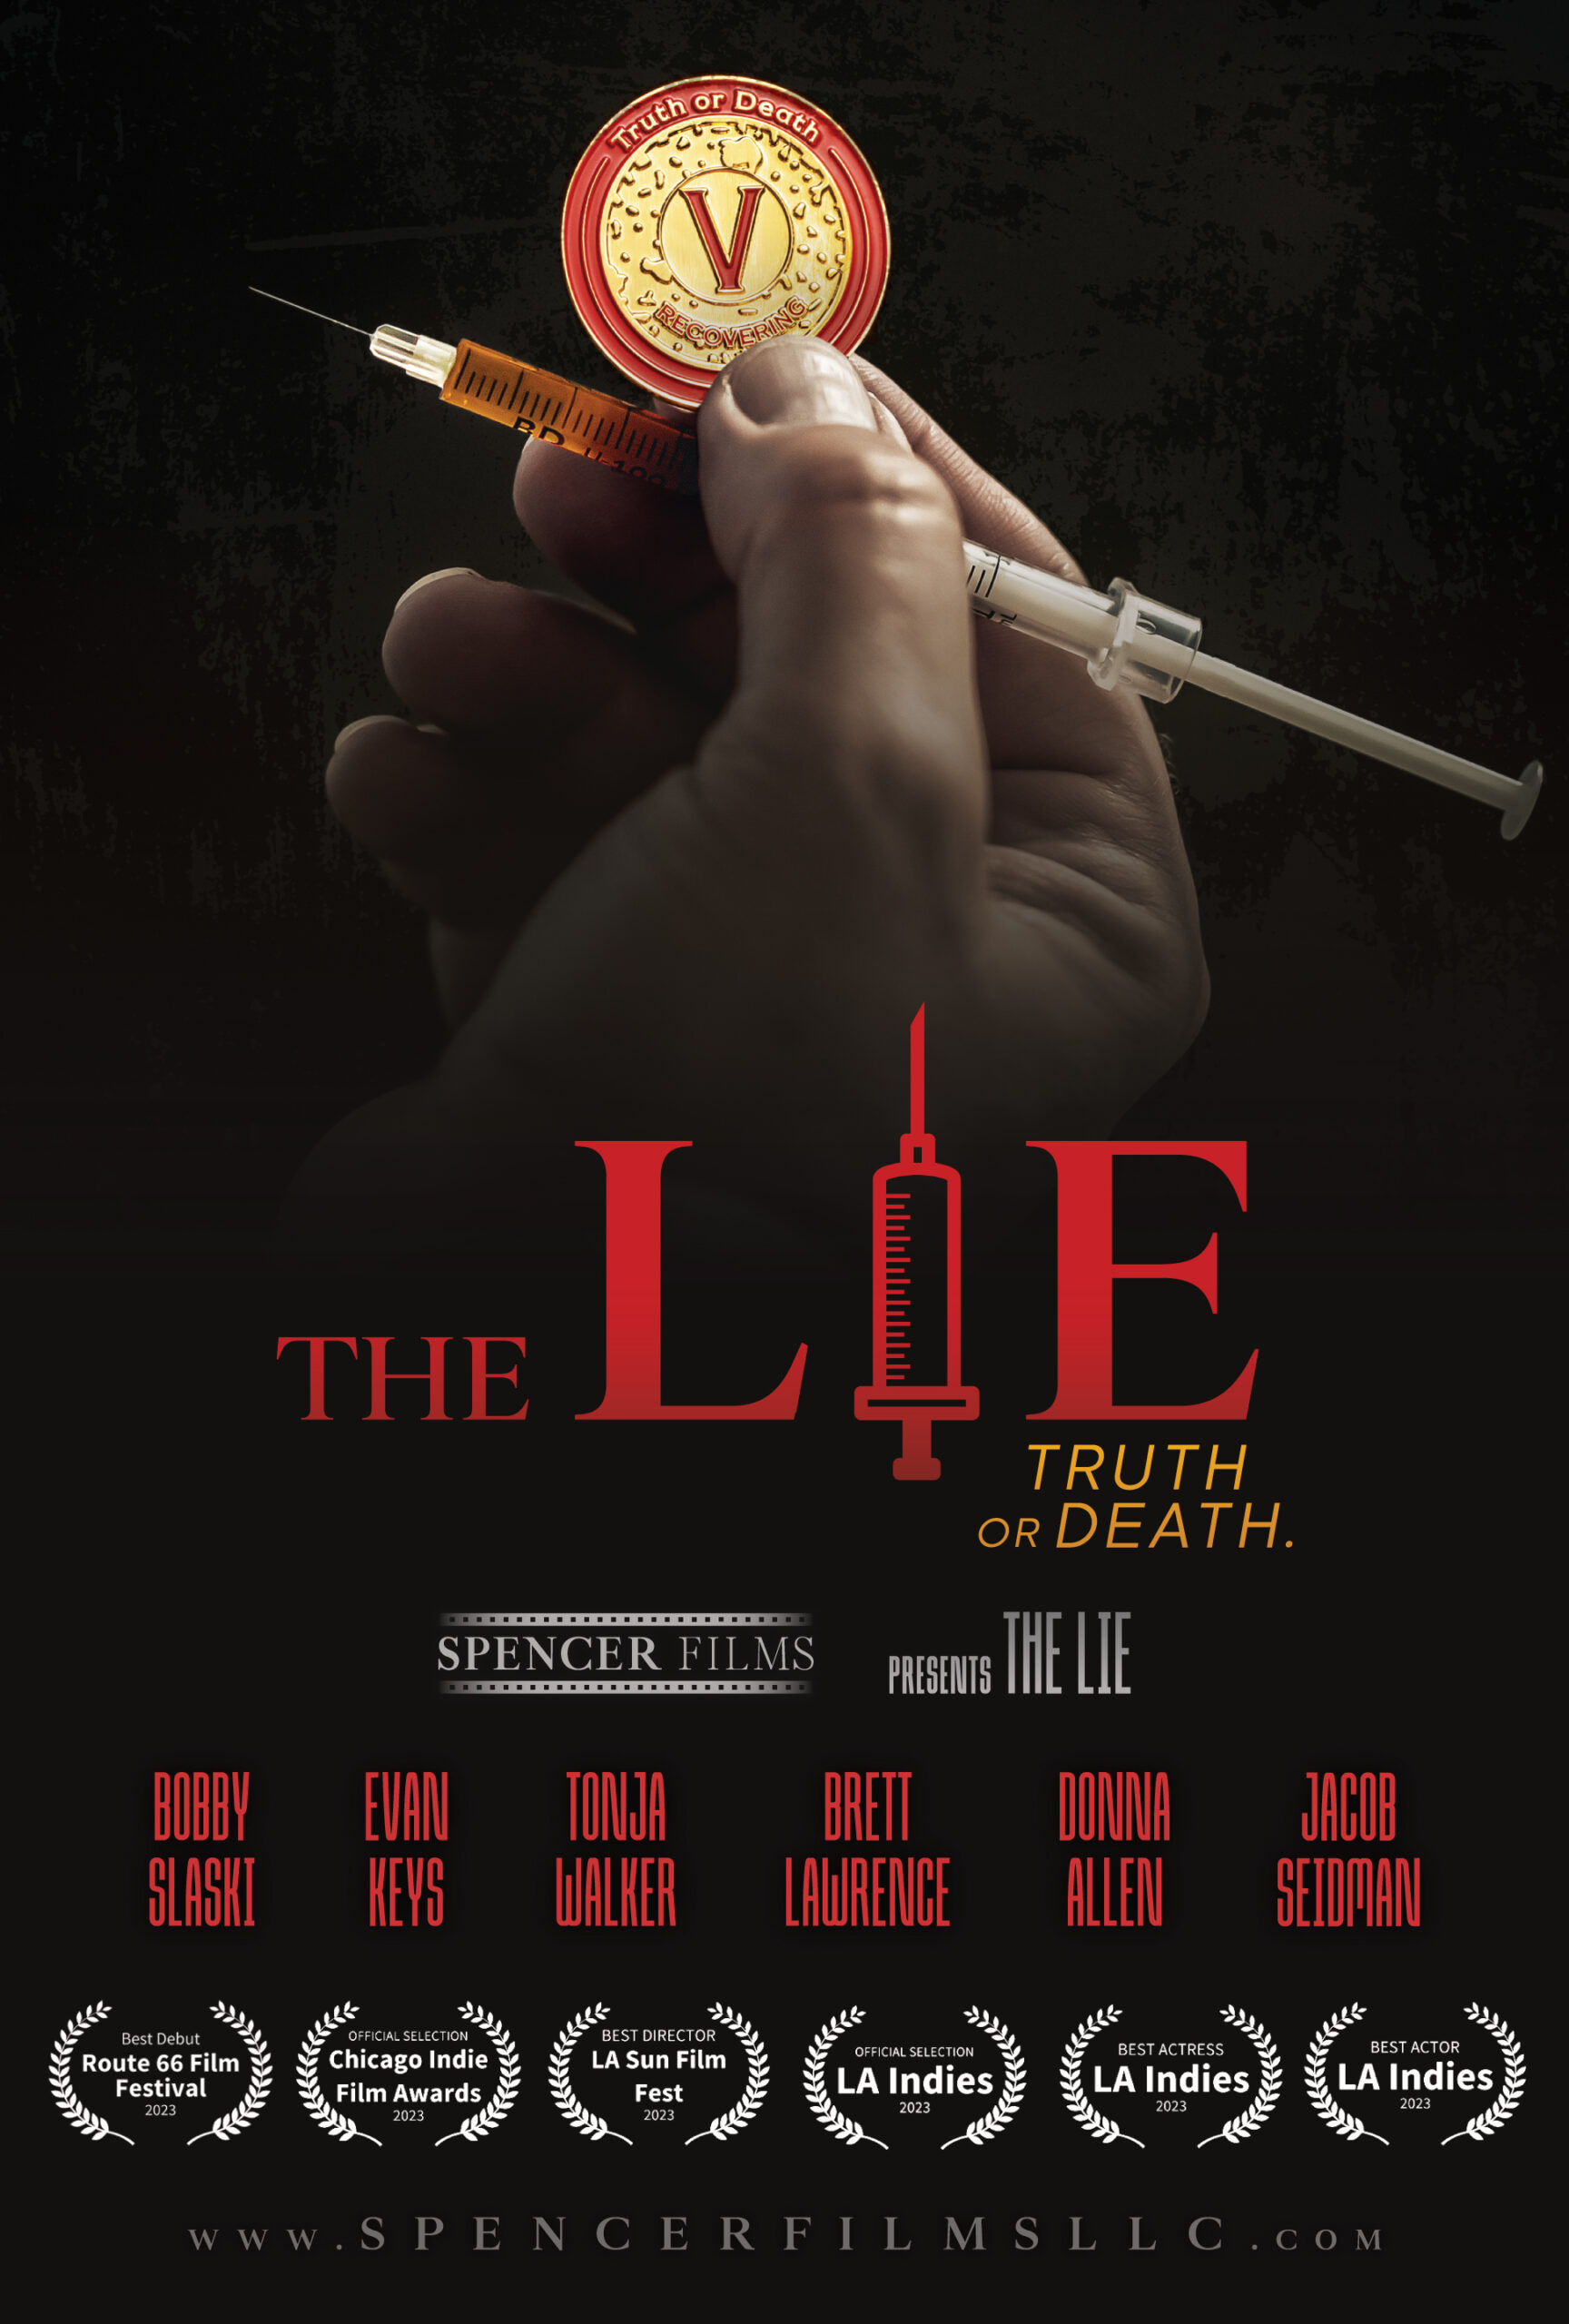 The Lie produced by Spencer Films LLC